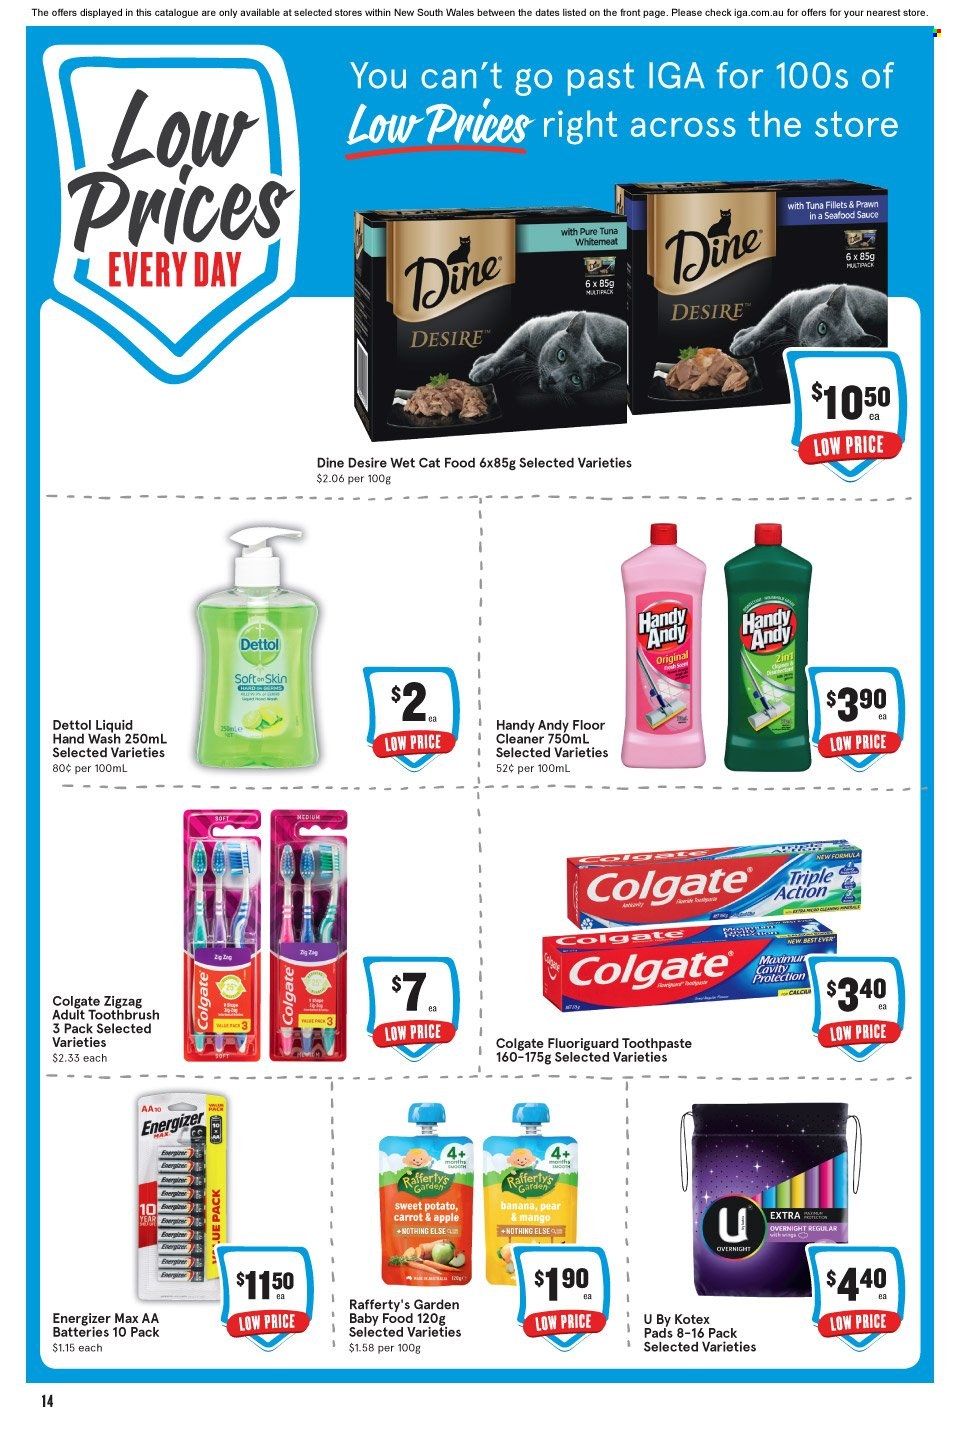 thumbnail - IGA Catalogue - 23 Nov 2022 - 29 Nov 2022 - Sales products - prawns, Dettol, cleaner, floor cleaner, hand wash, Colgate, toothbrush, toothpaste, Kotex, Kotex pads, battery, Energizer, aa batteries, animal food, cat food, wet cat food. Page 10.